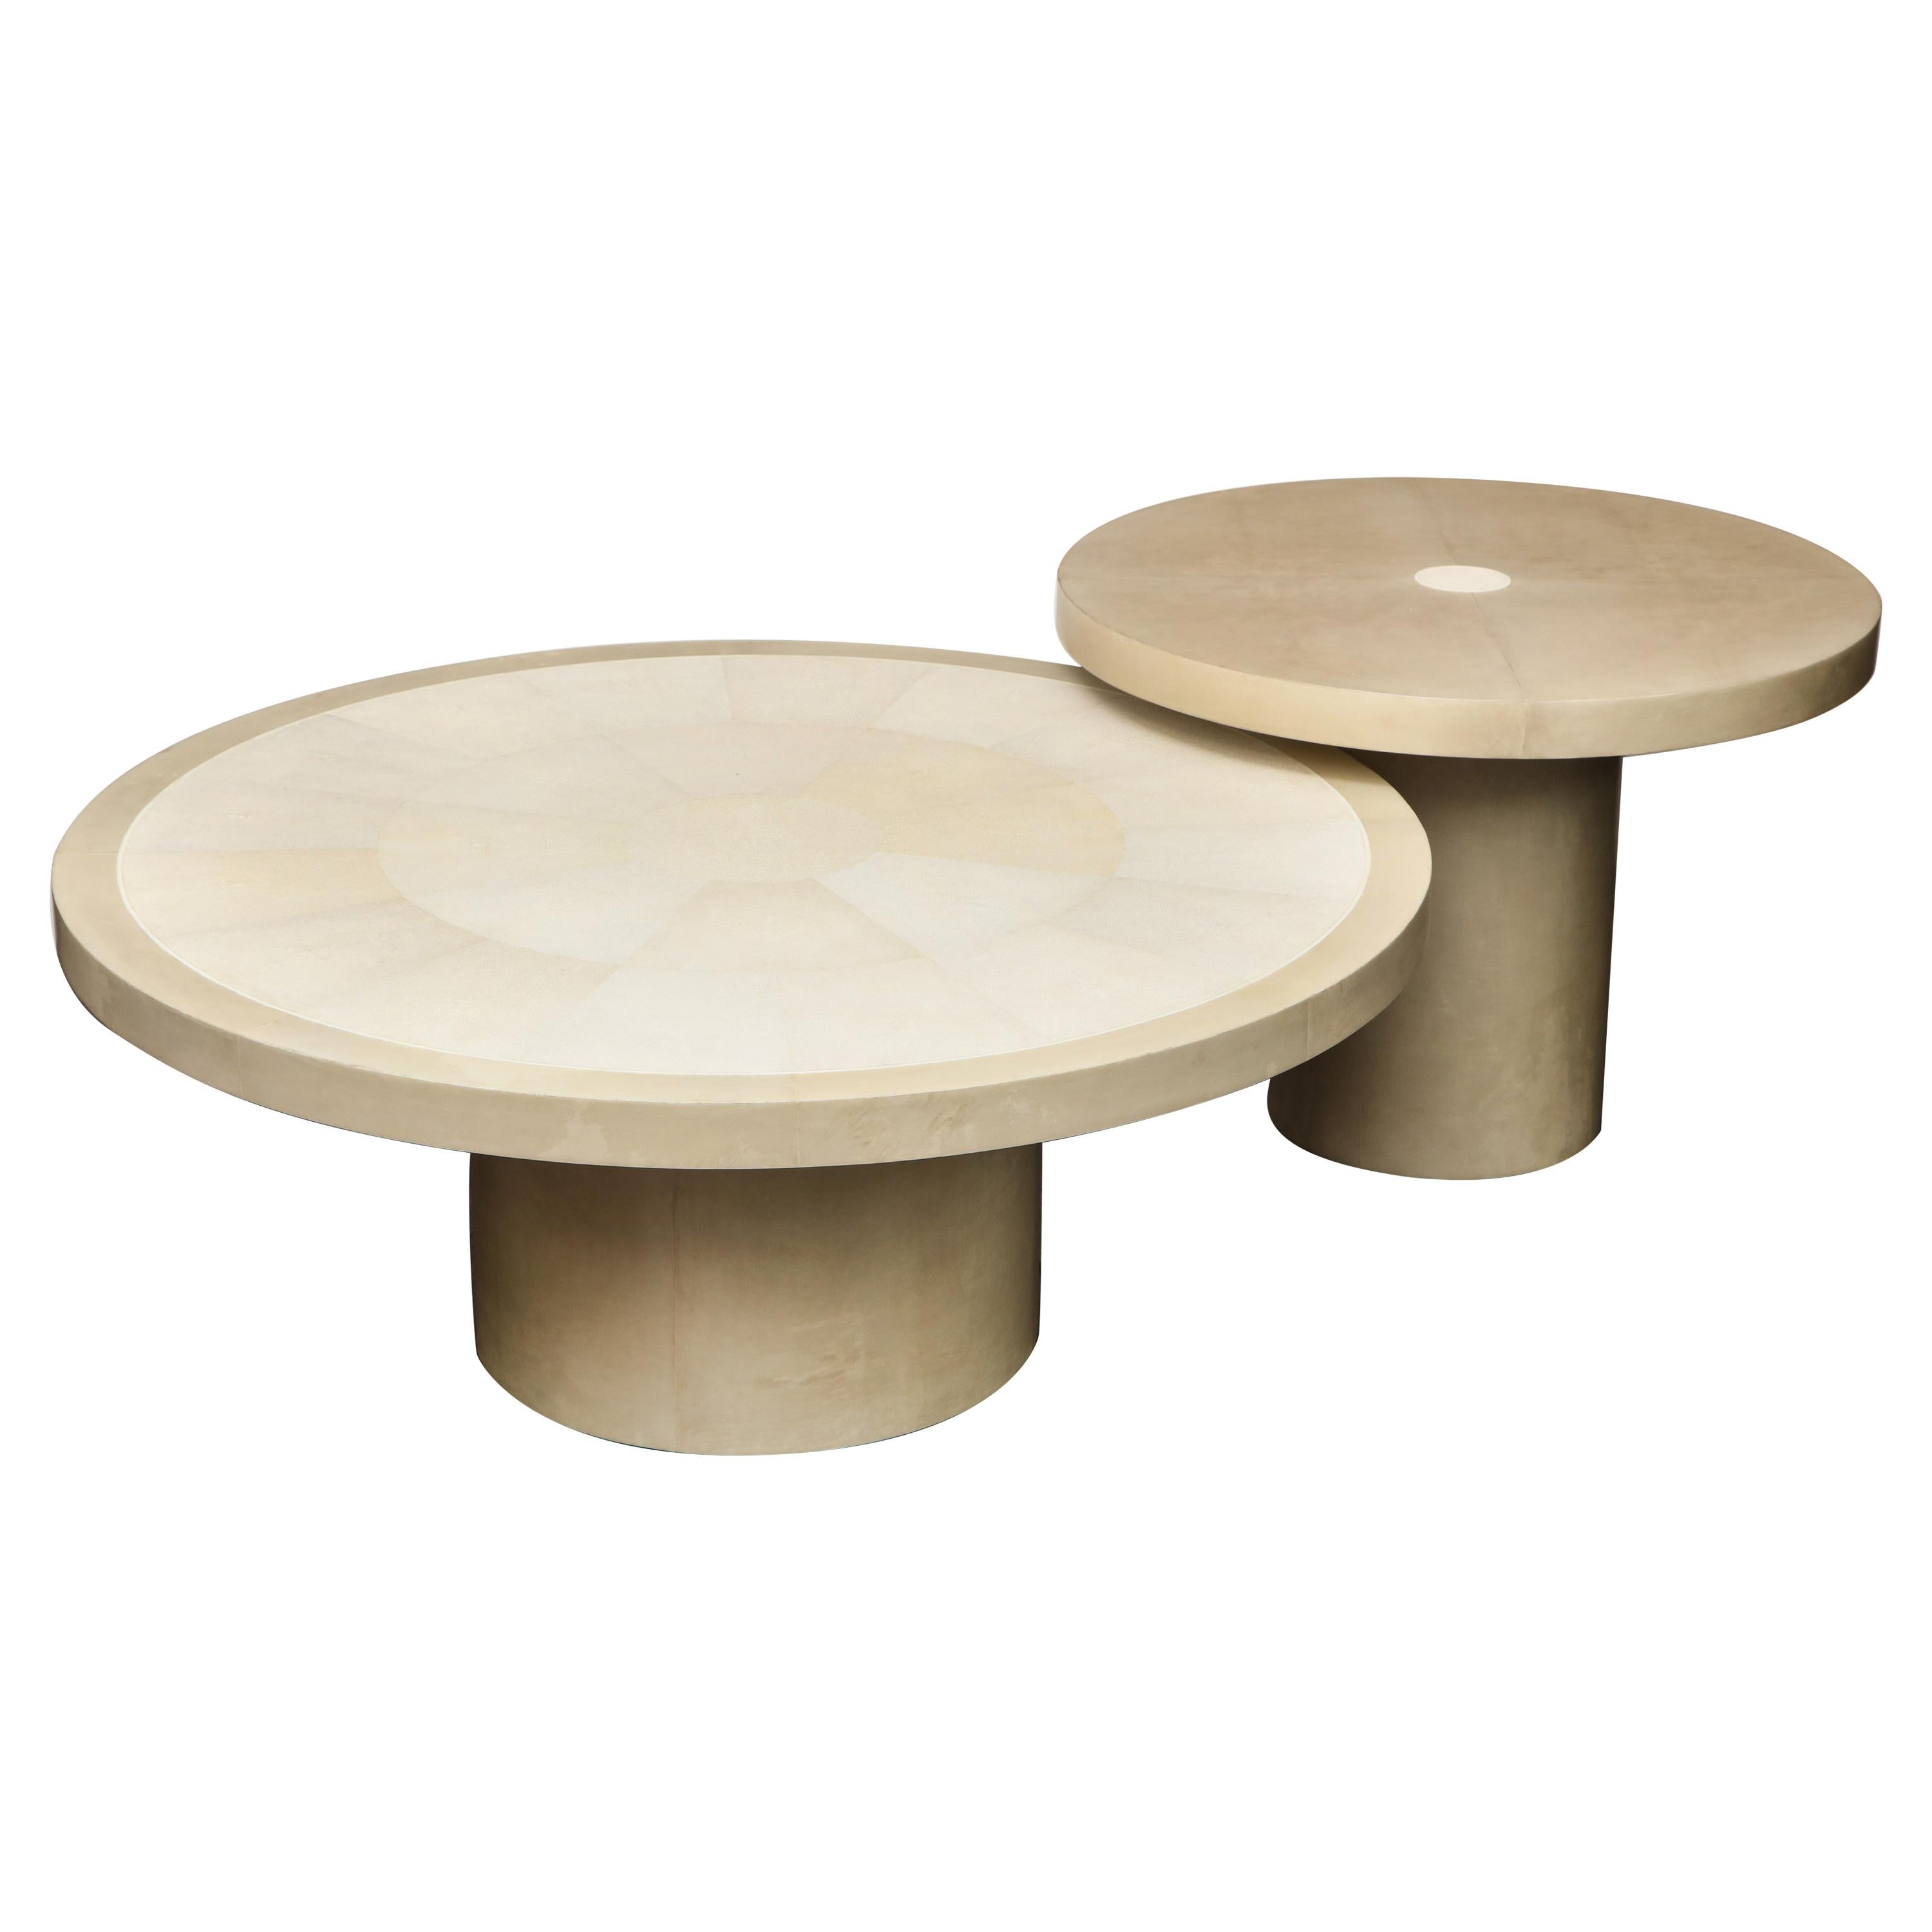 Set of 2 Round Genuine Shagreen and Parchment Tables with Bone Trim